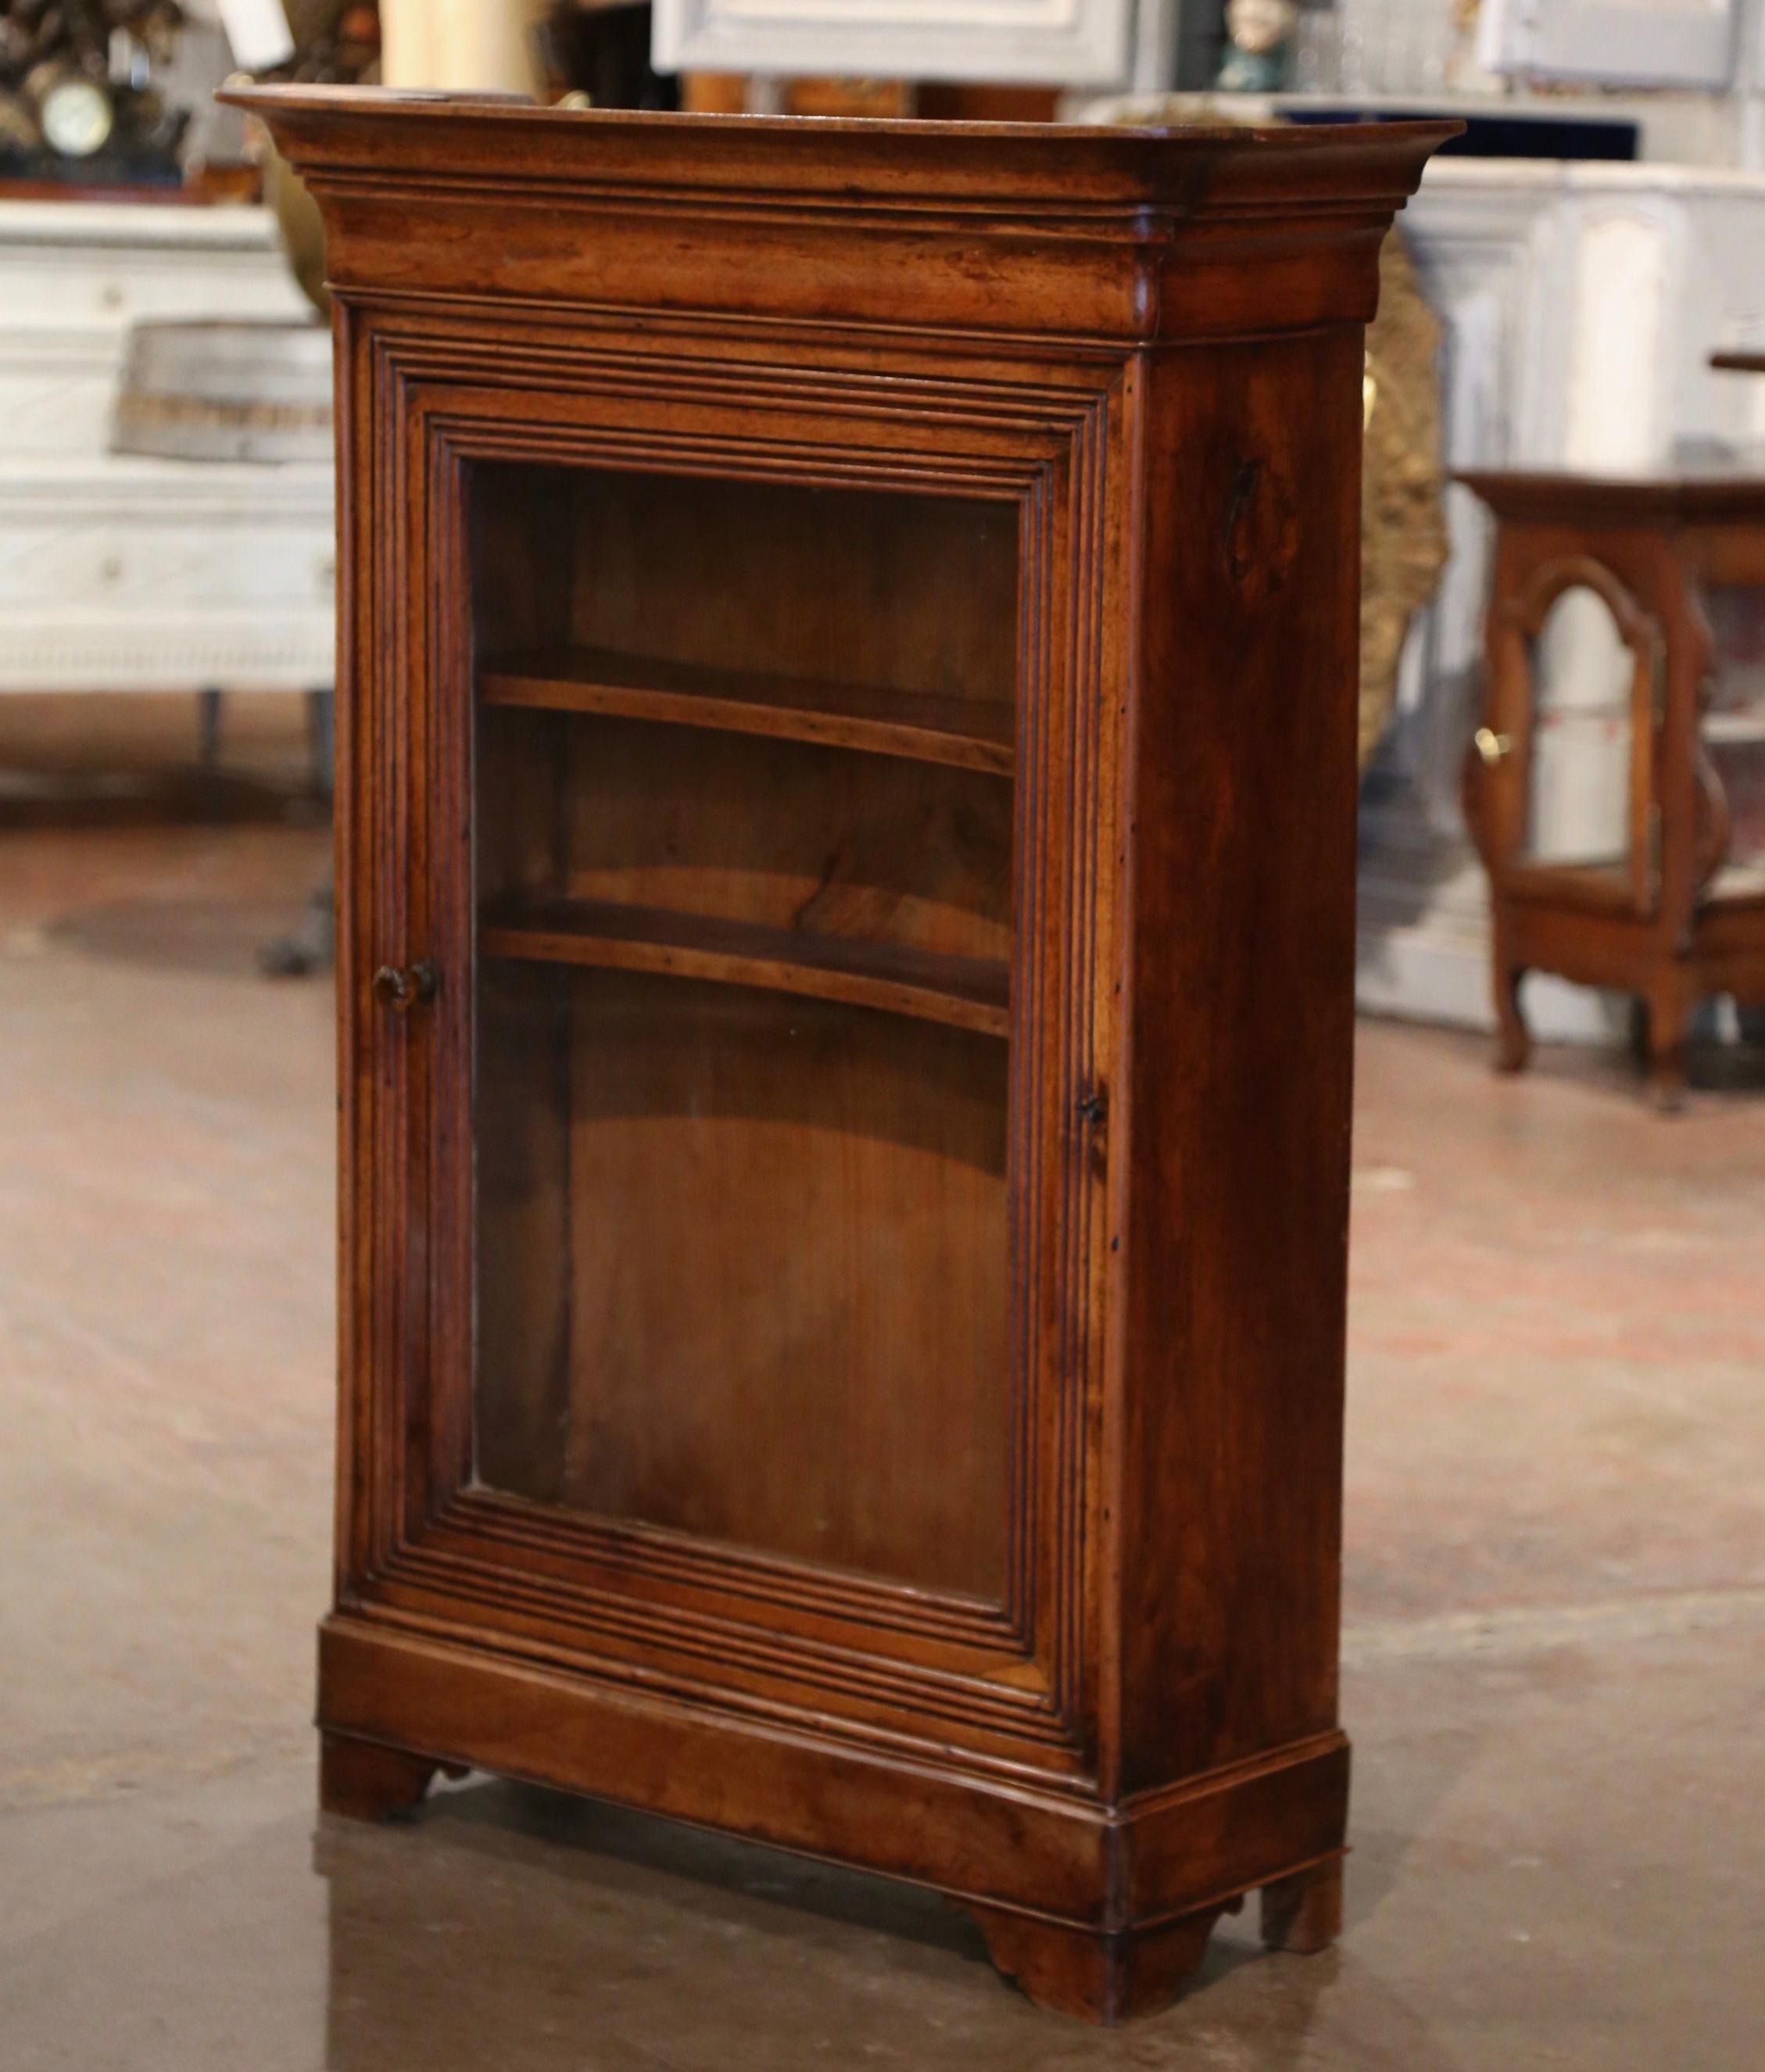 This elegant antique vitrine was crafted in southern France, circa 1850. The wall cabinet with bonnet top, stands on bracket feet, and is decorated with spline motifs on the facade. The curio cabinet features a carved single door dressed with the